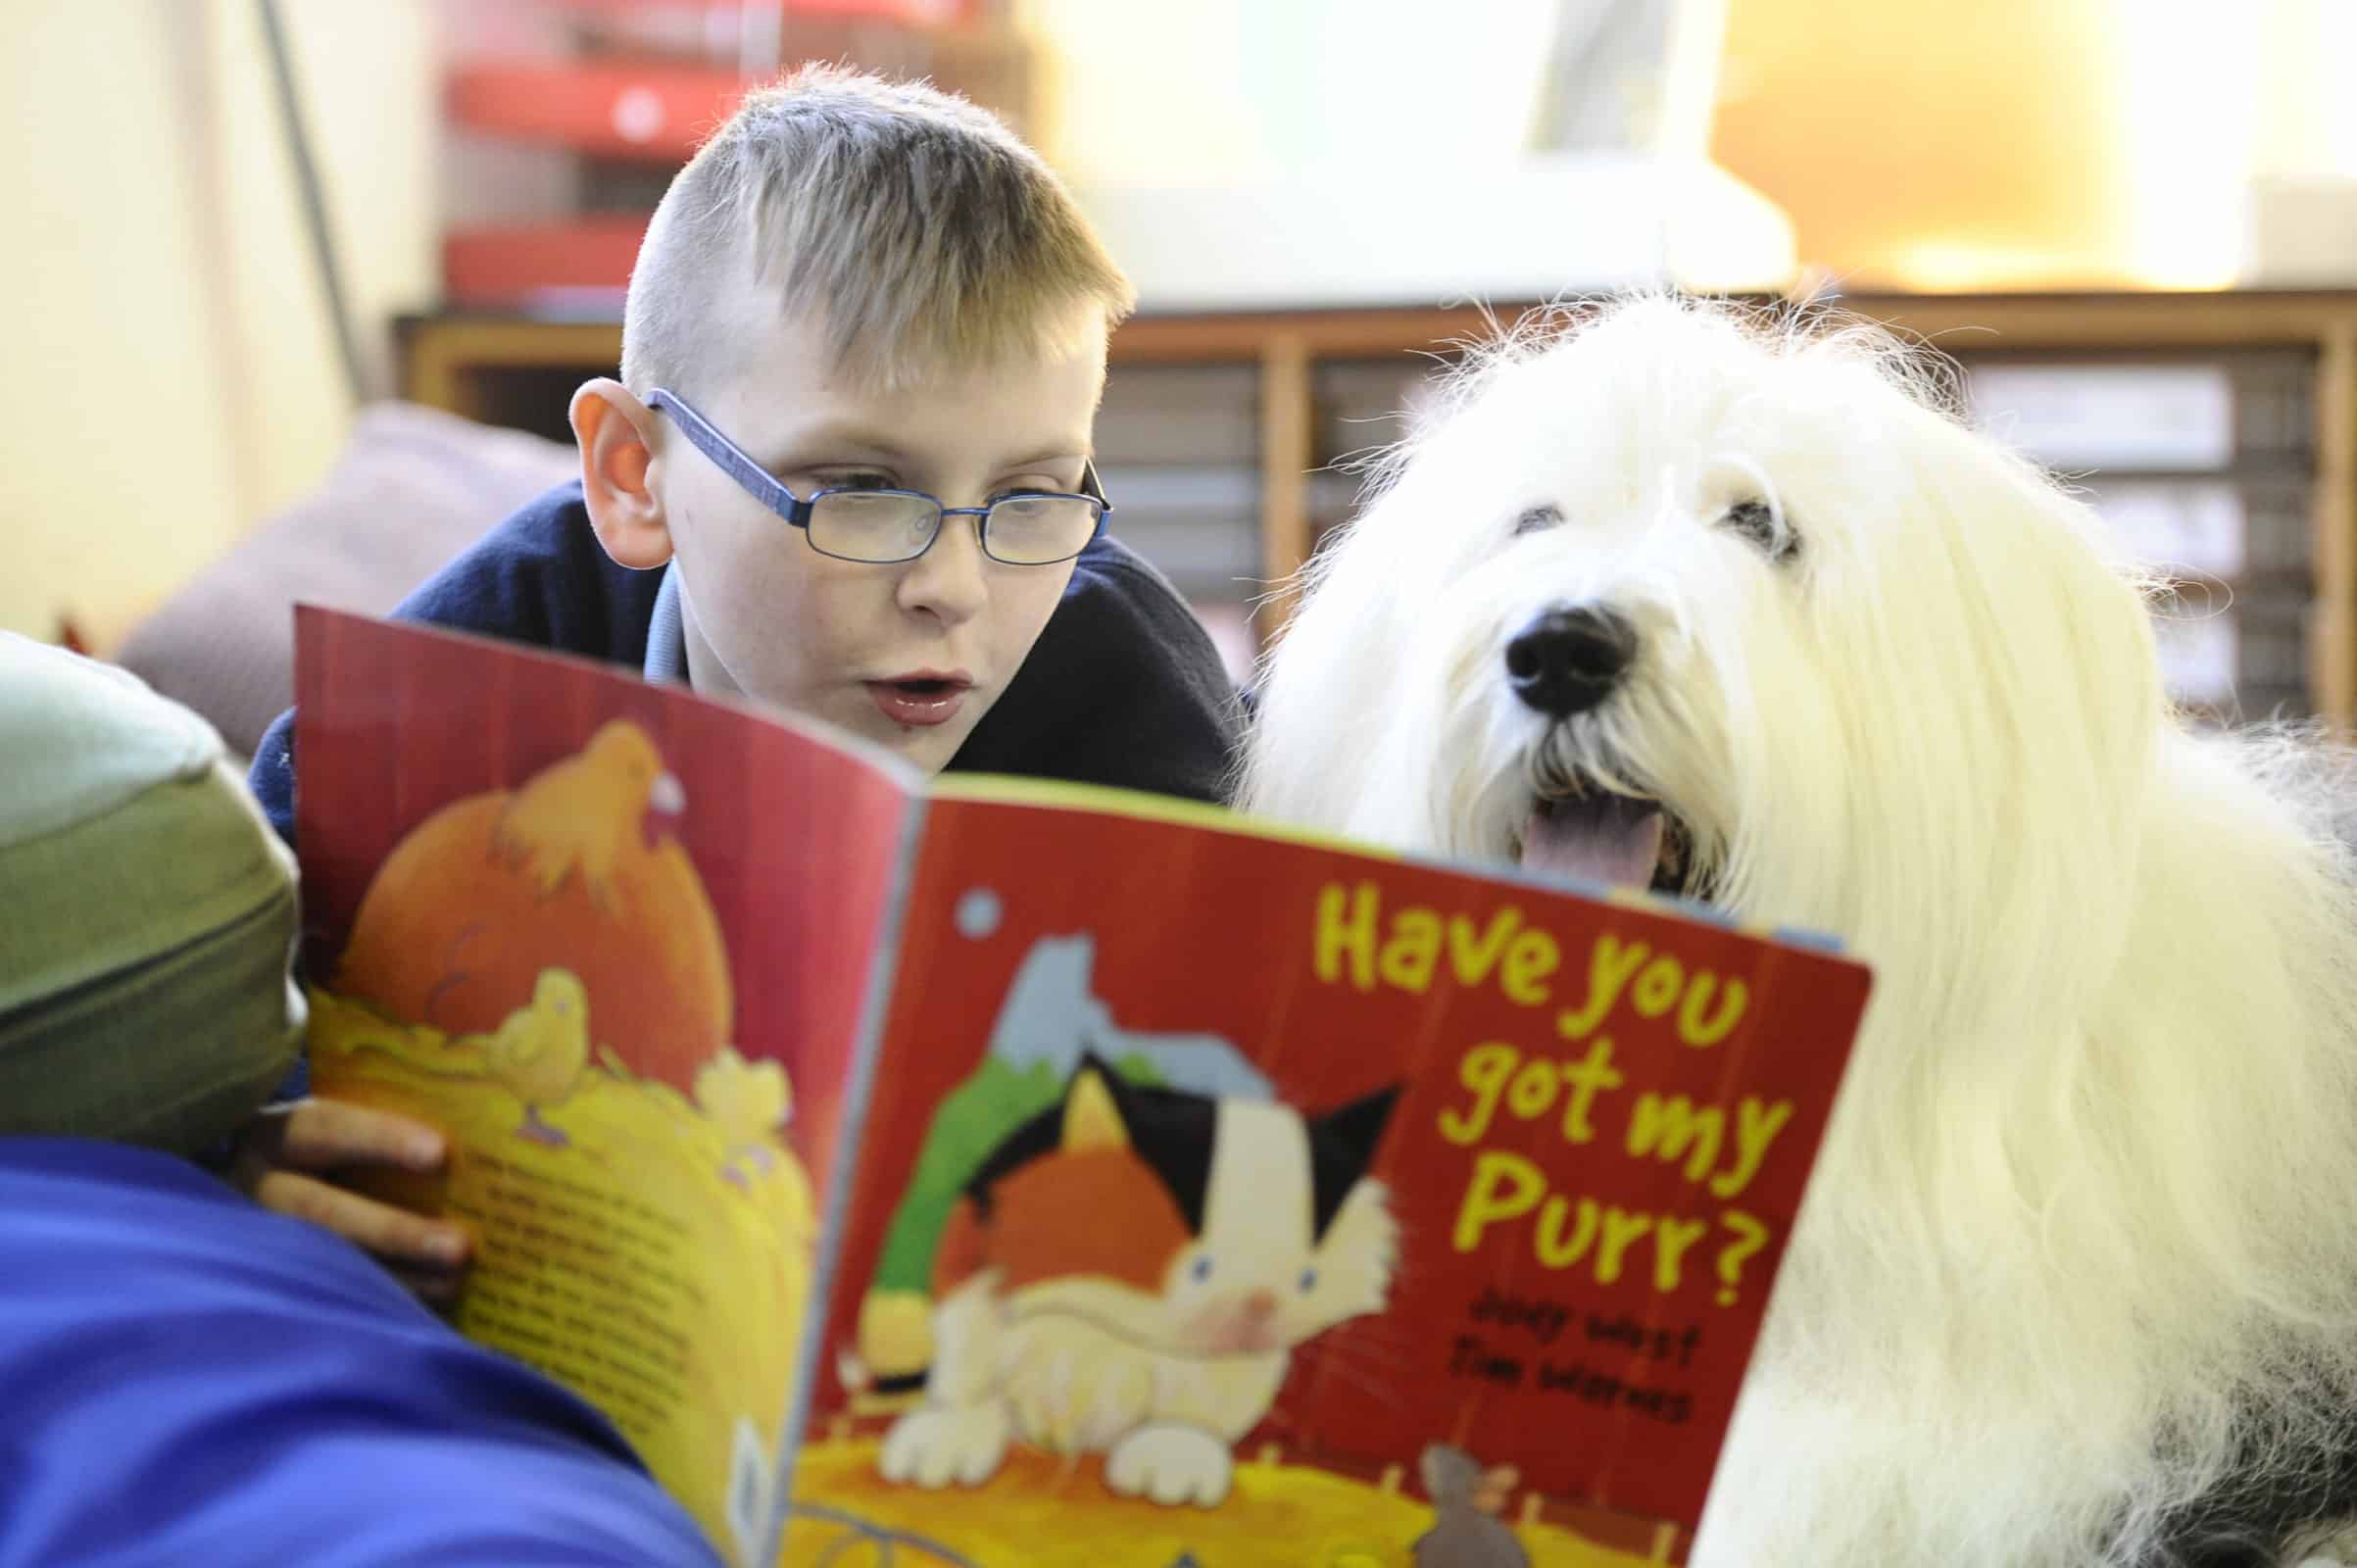 When kids read to dogs their reading and confidence is given a boost. The Kennel Club explains why they train dogs to read in schools to improve child literacy